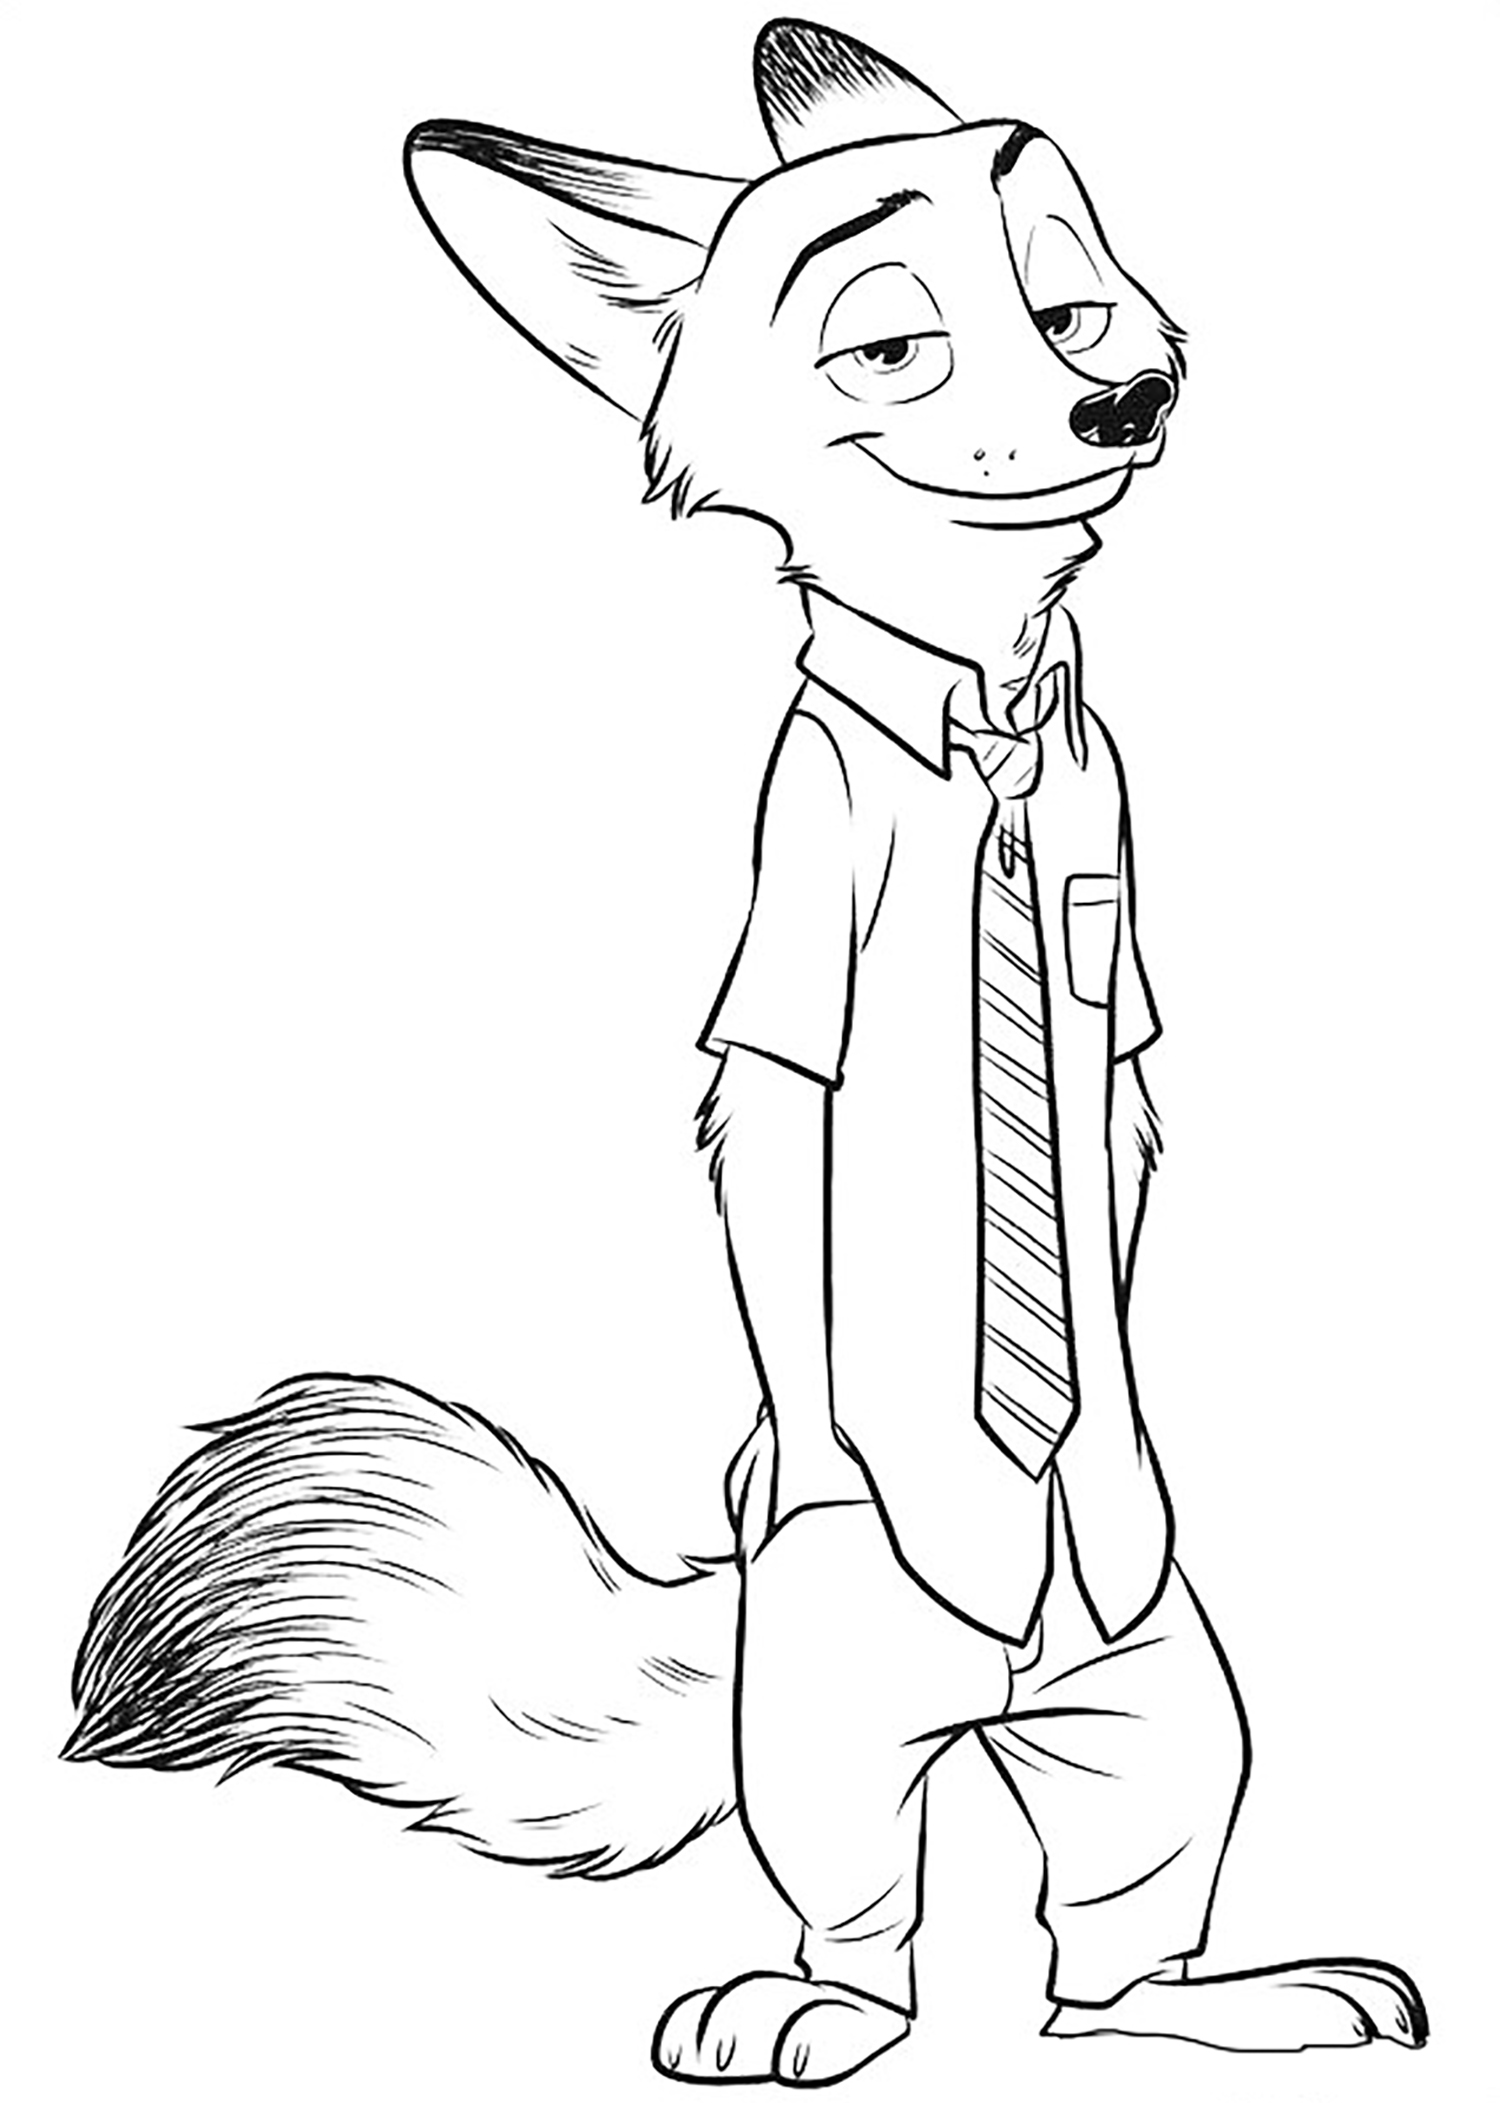 Zootopia for children   Zootopia Kids Coloring Pages